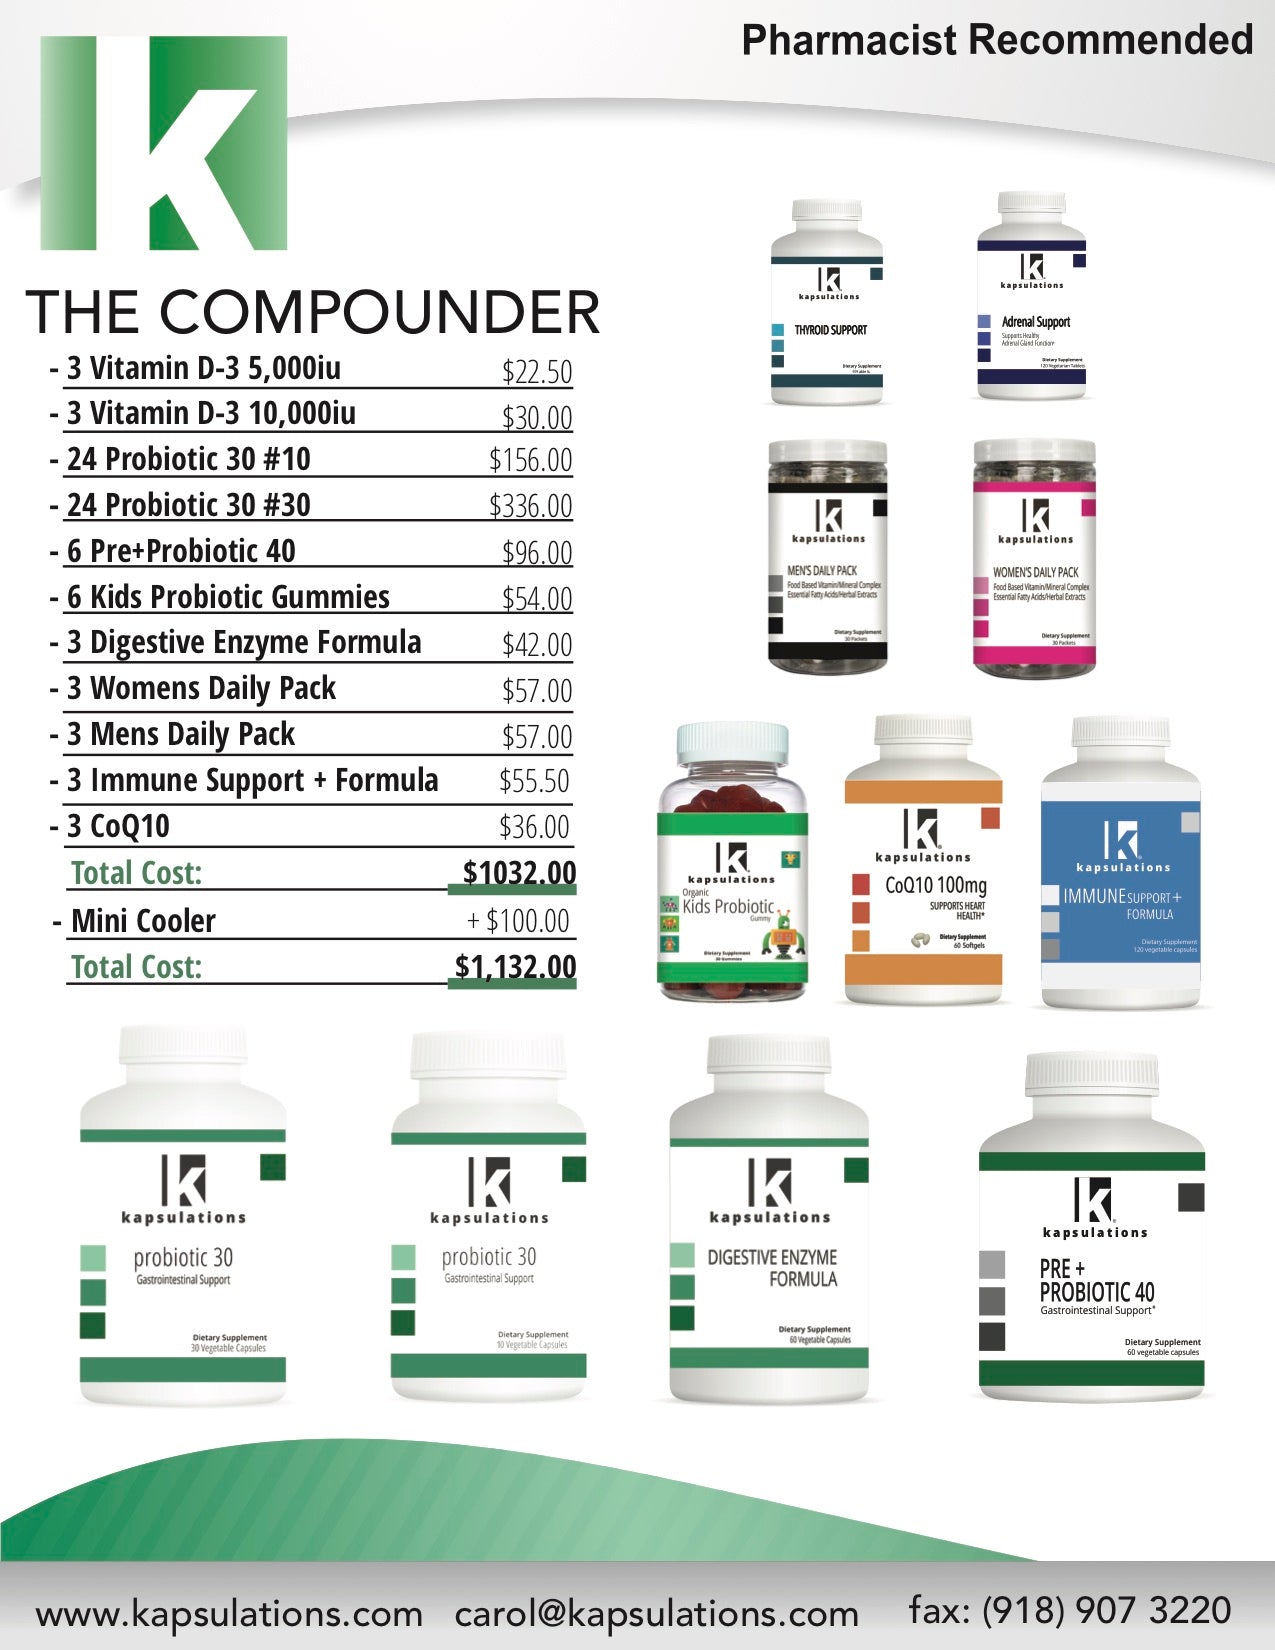 THE COMPOUNDER PACKAGE